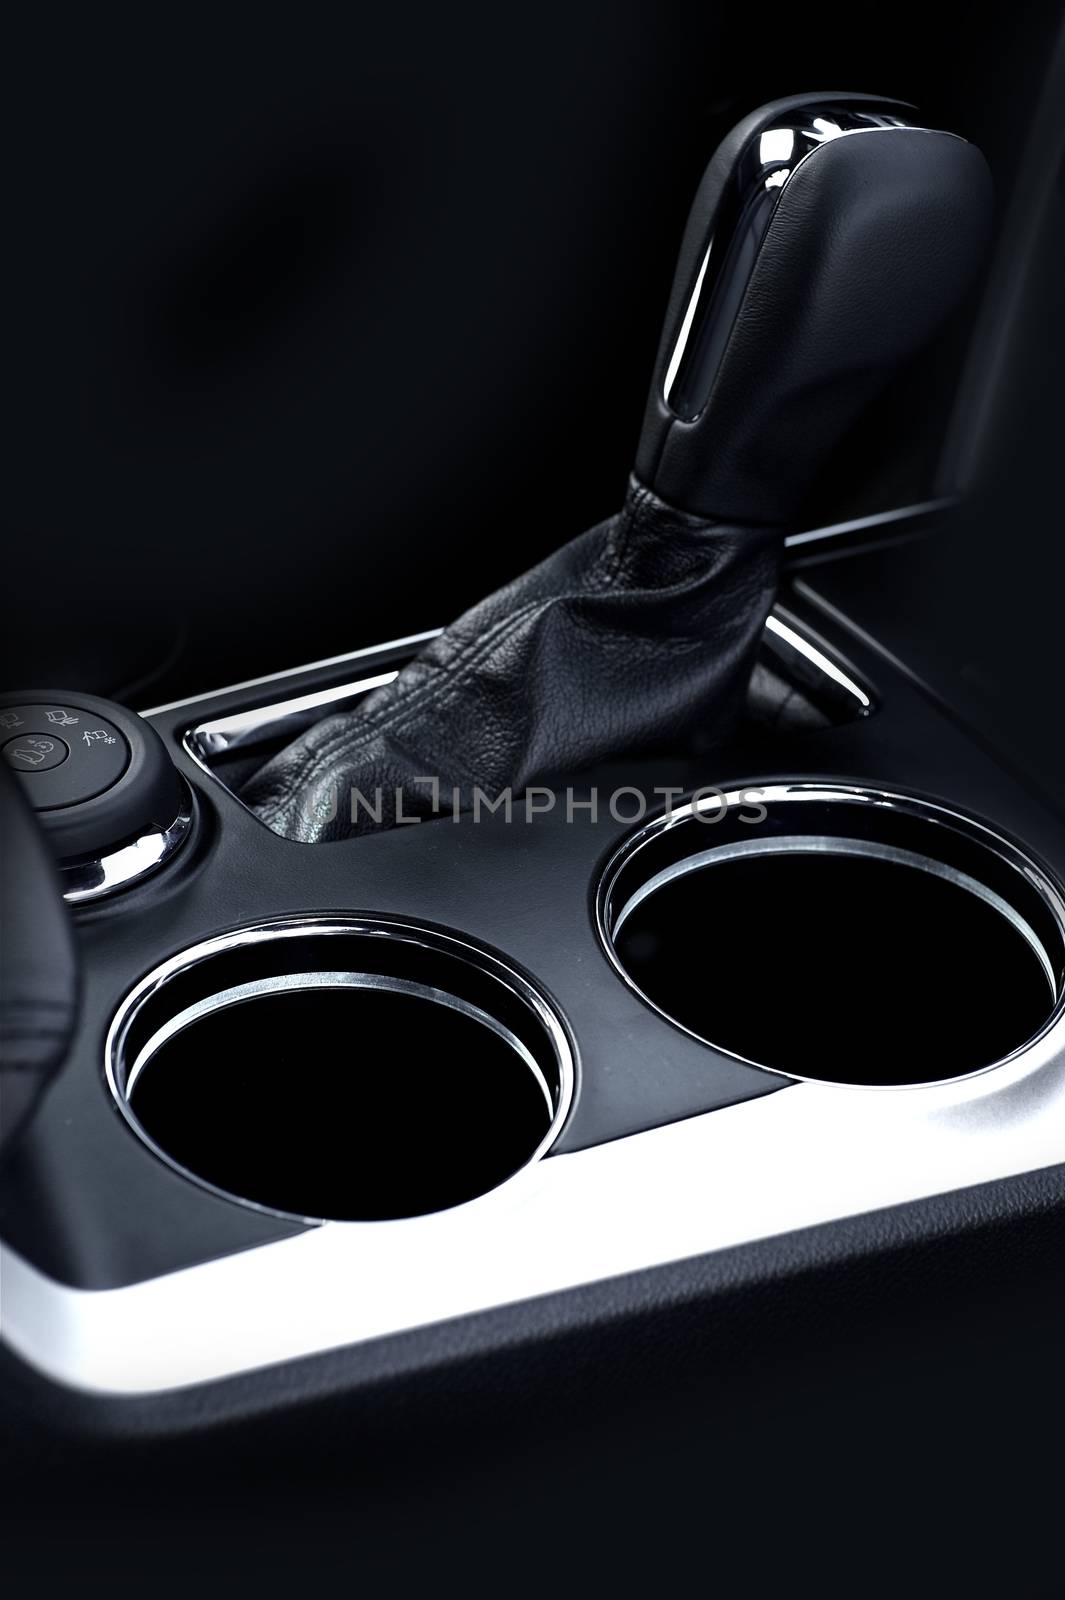 Gear Stick For Automatic Transmission and Cup Holders. Modern Vehicle Interior Design.